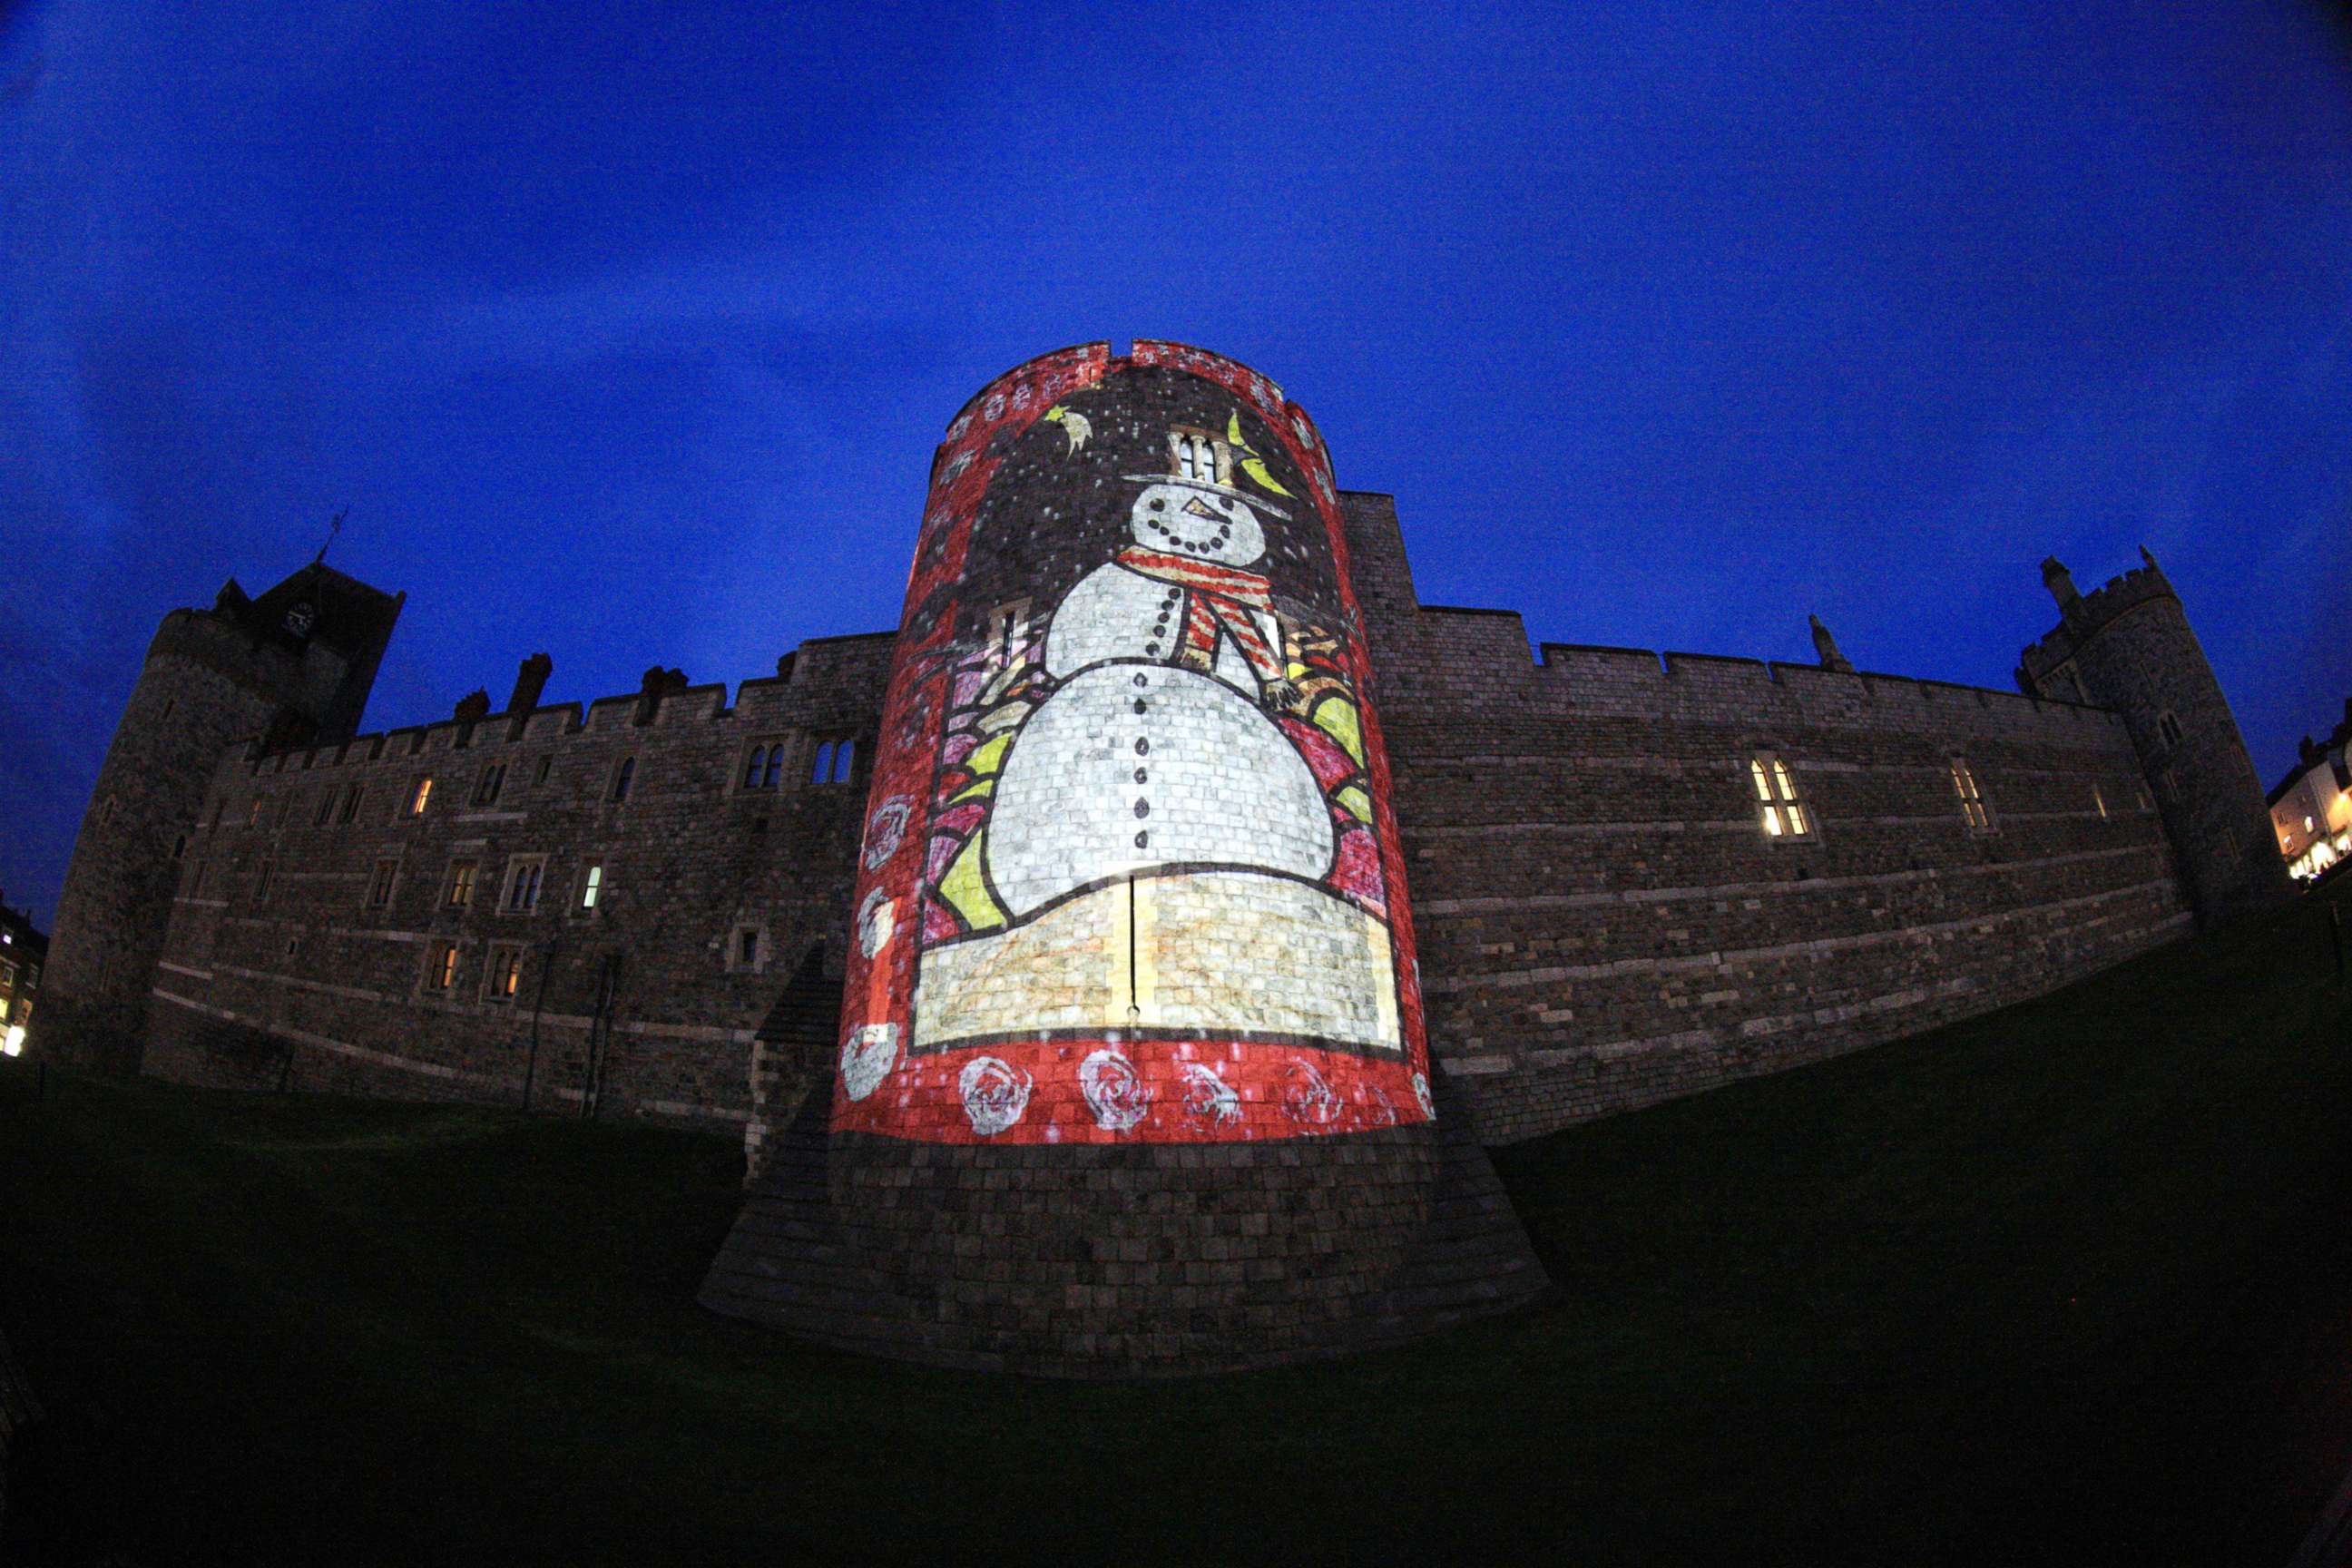 PHOTO: The Garter Tower at Windsor Castle is lit up with festive projections for the holidays, Nov. 17, 2019.